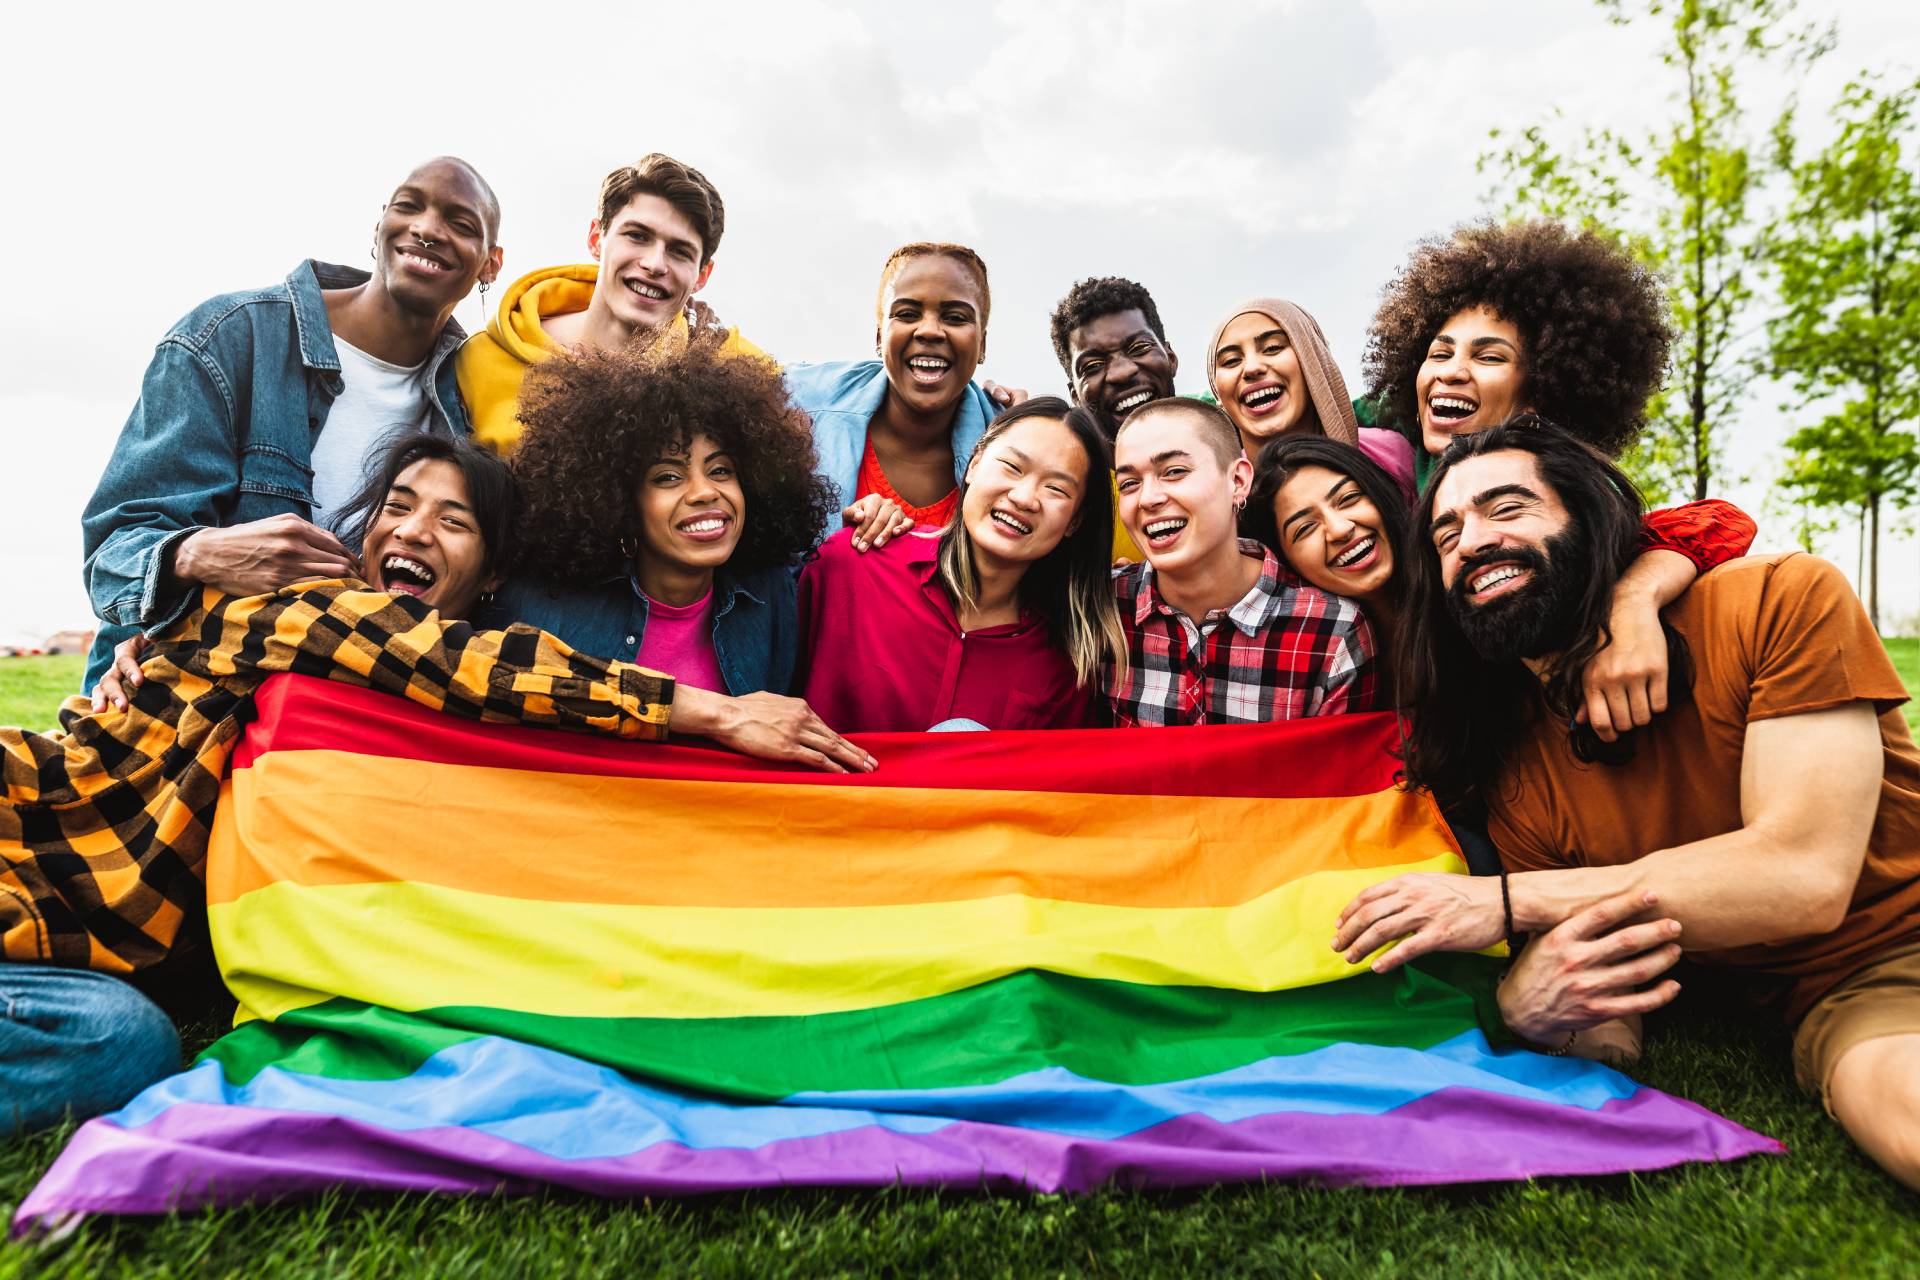 Proudly Display a Healthier Smile this LGBTQ+ Pride Month